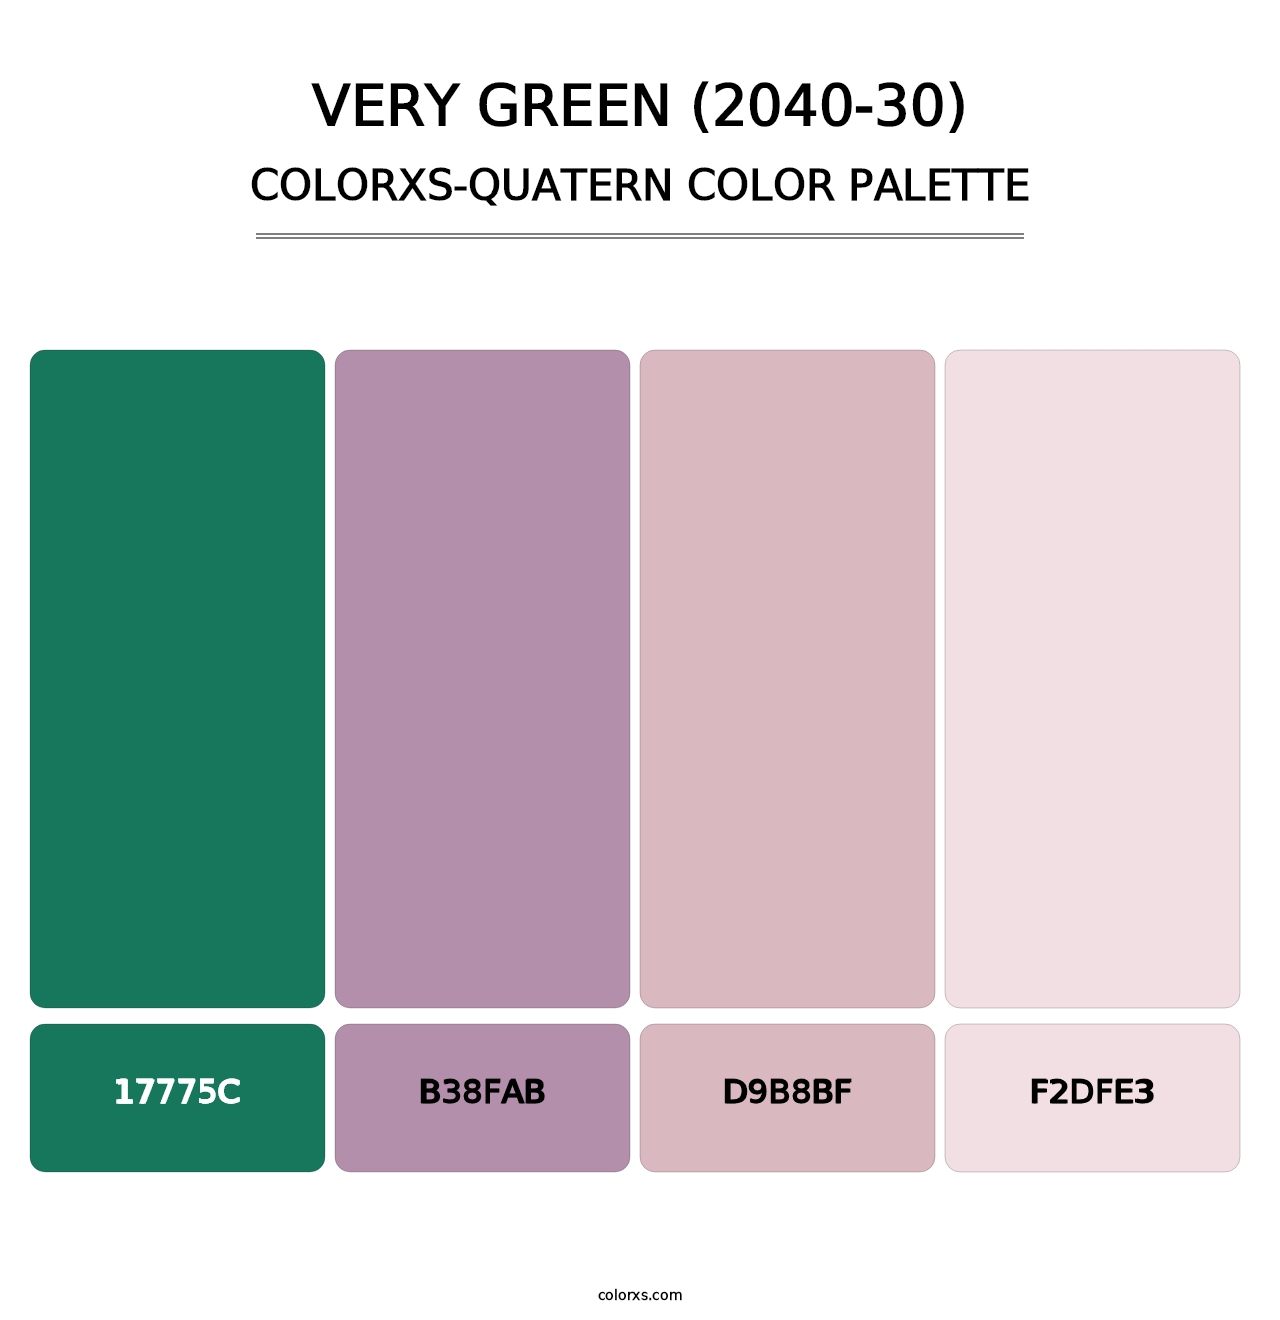 Very Green (2040-30) - Colorxs Quatern Palette